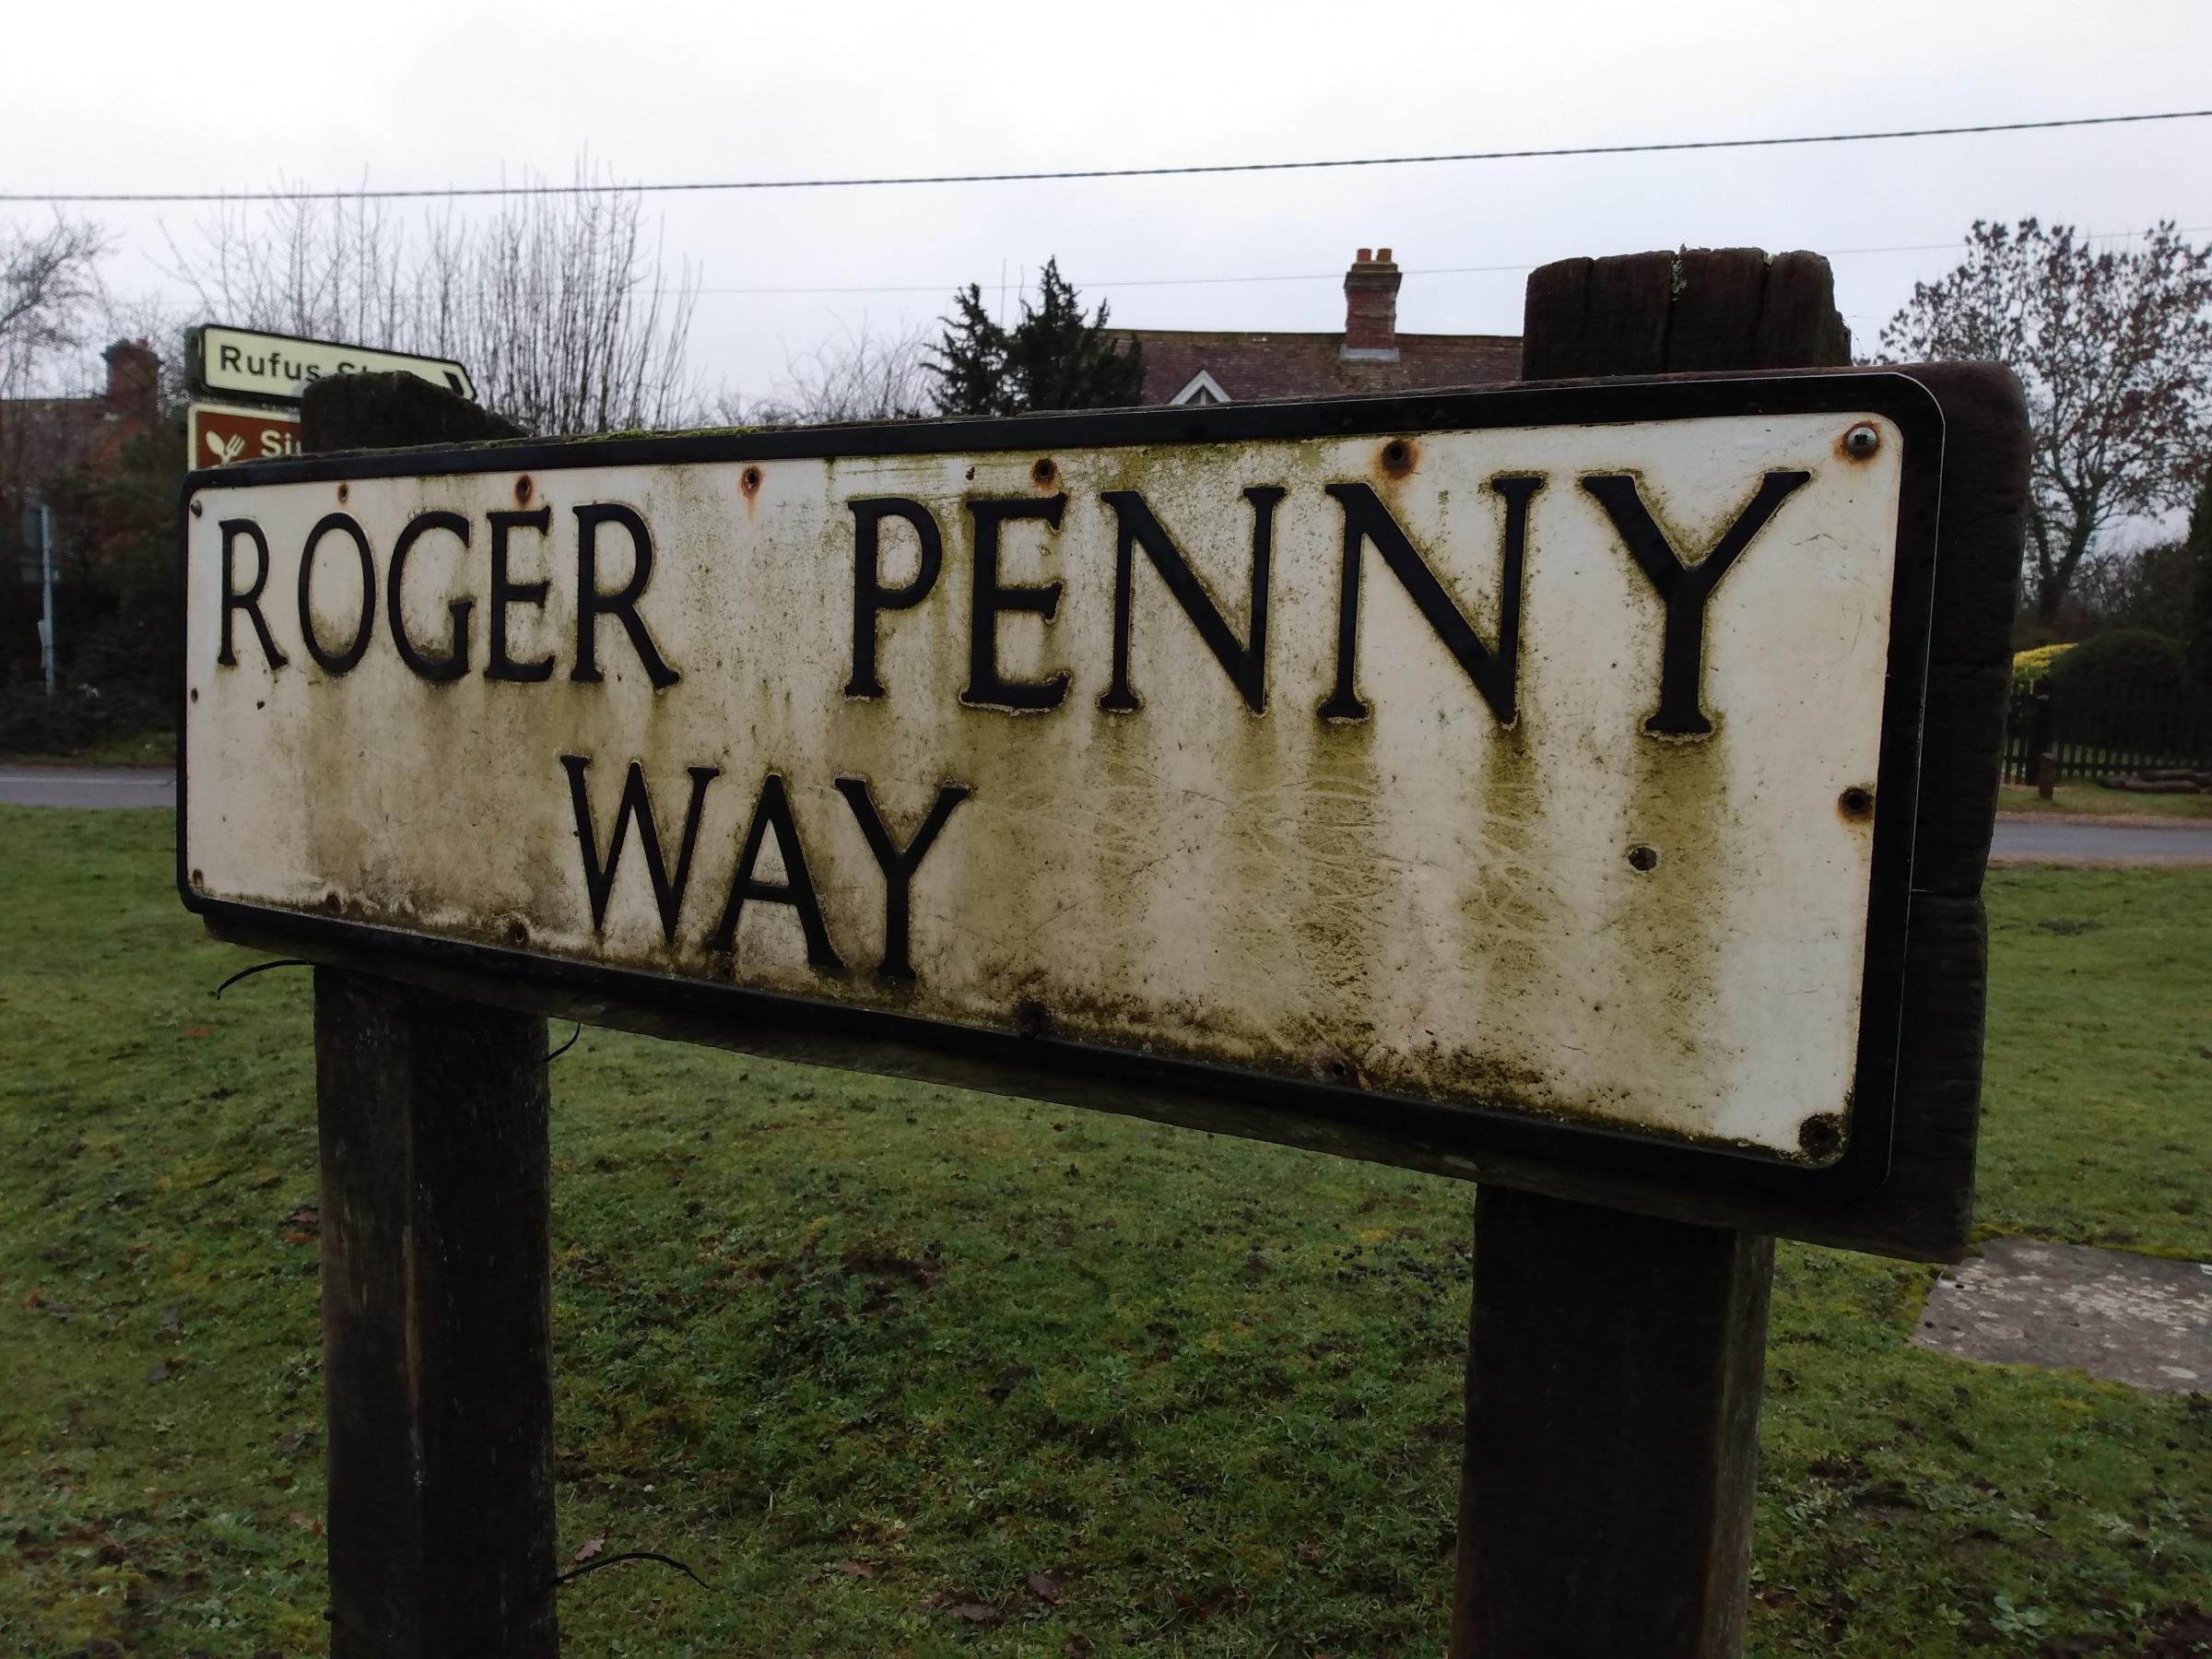 Campaigners are calling on speed cameras on Roger Penny Way, near Brook.